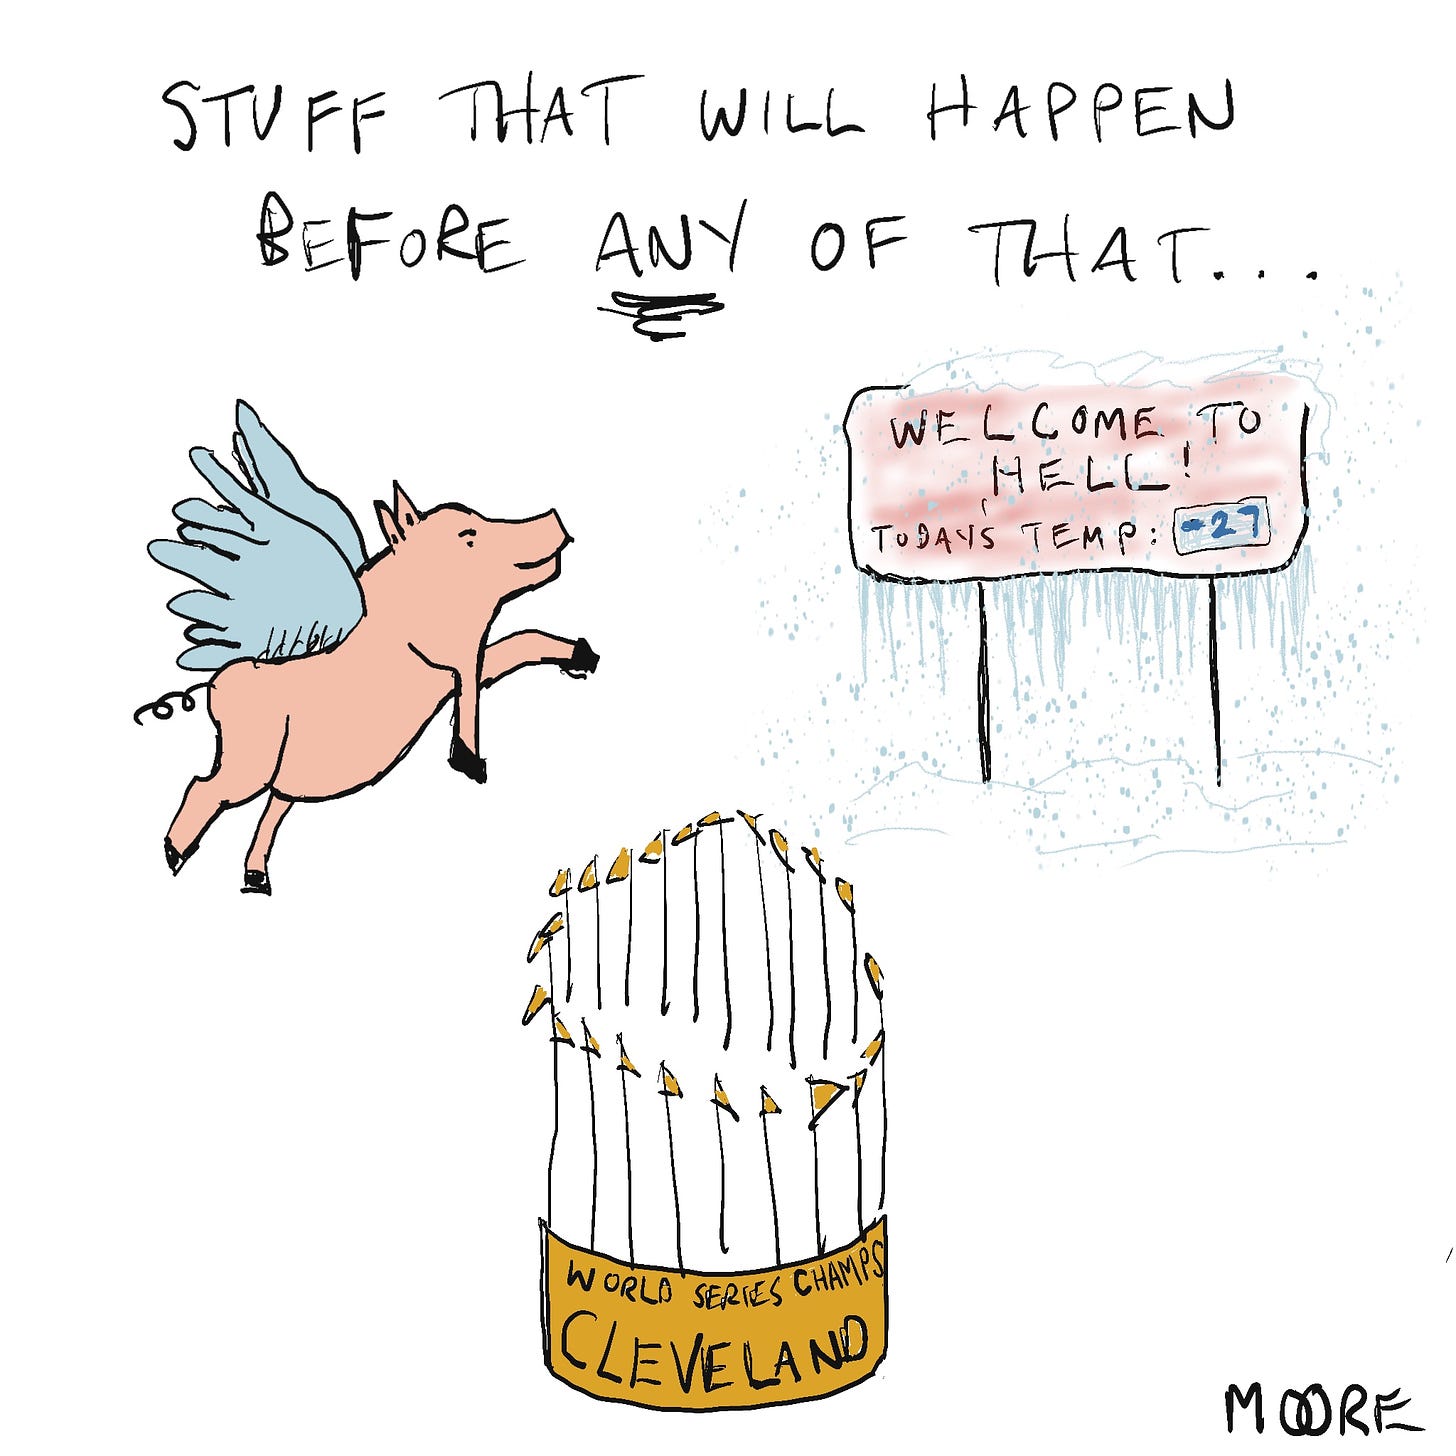 Cartoon of pig flying, welcome to frozen hell, and Cleveland World Series Trophy